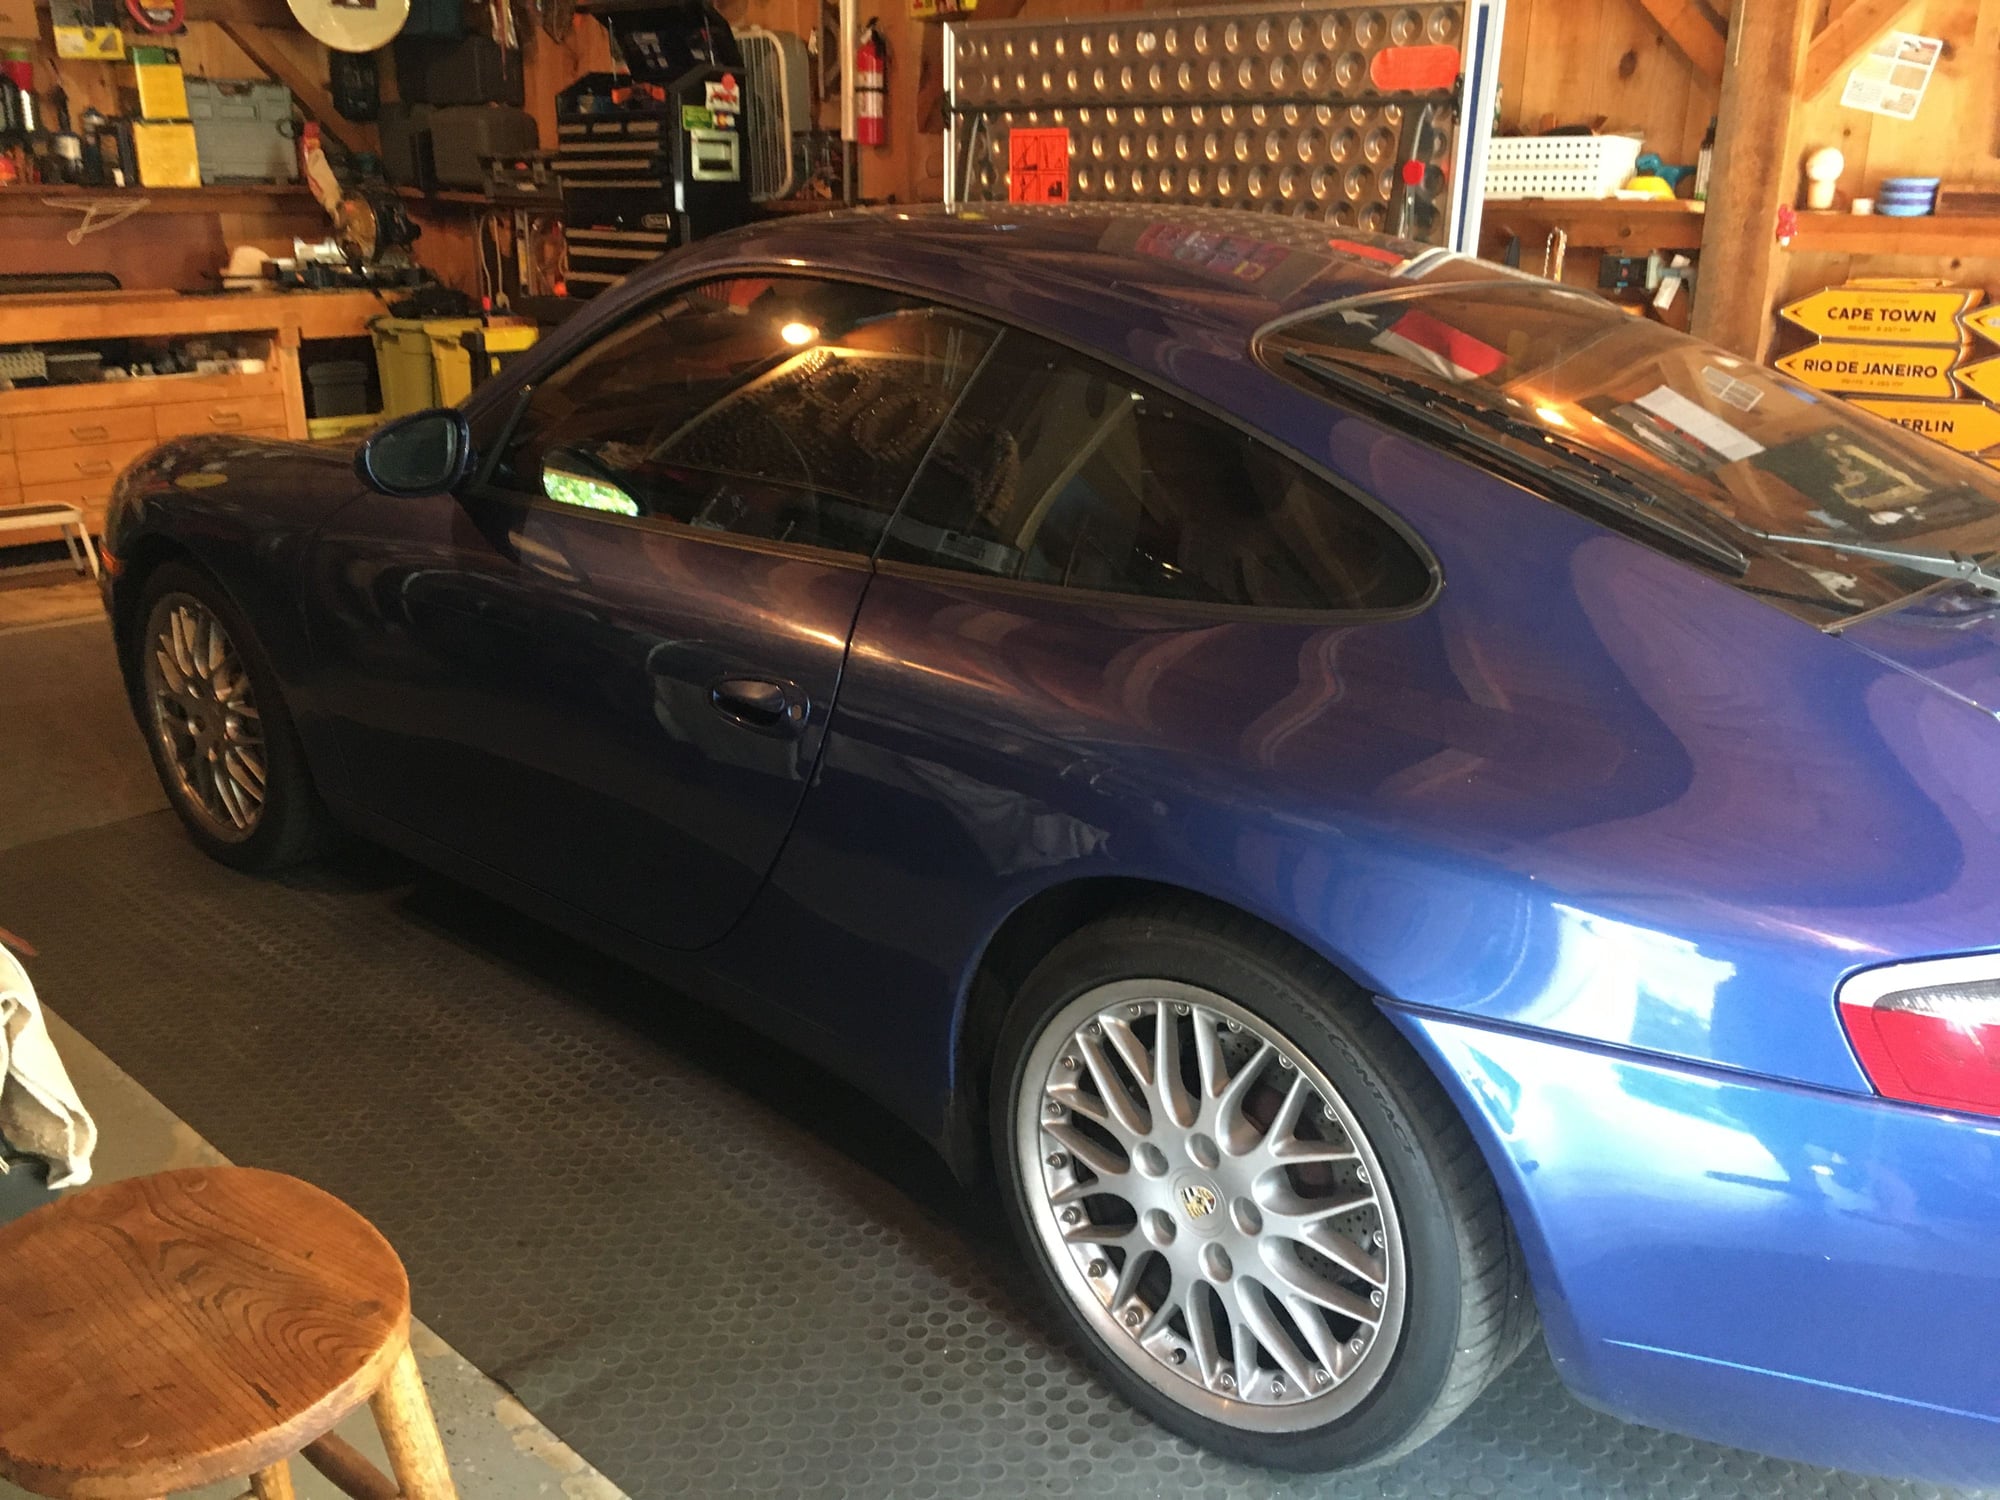 2001 Porsche 911 - 2001 996 Carrera 4  - Project Car    NOT A SALVAGE - Used - VIN wpoaa299x1s622240 - 77,500 Miles - 6 cyl - 4WD - Manual - Coupe - Blue - Sherman, CT 06784, United States